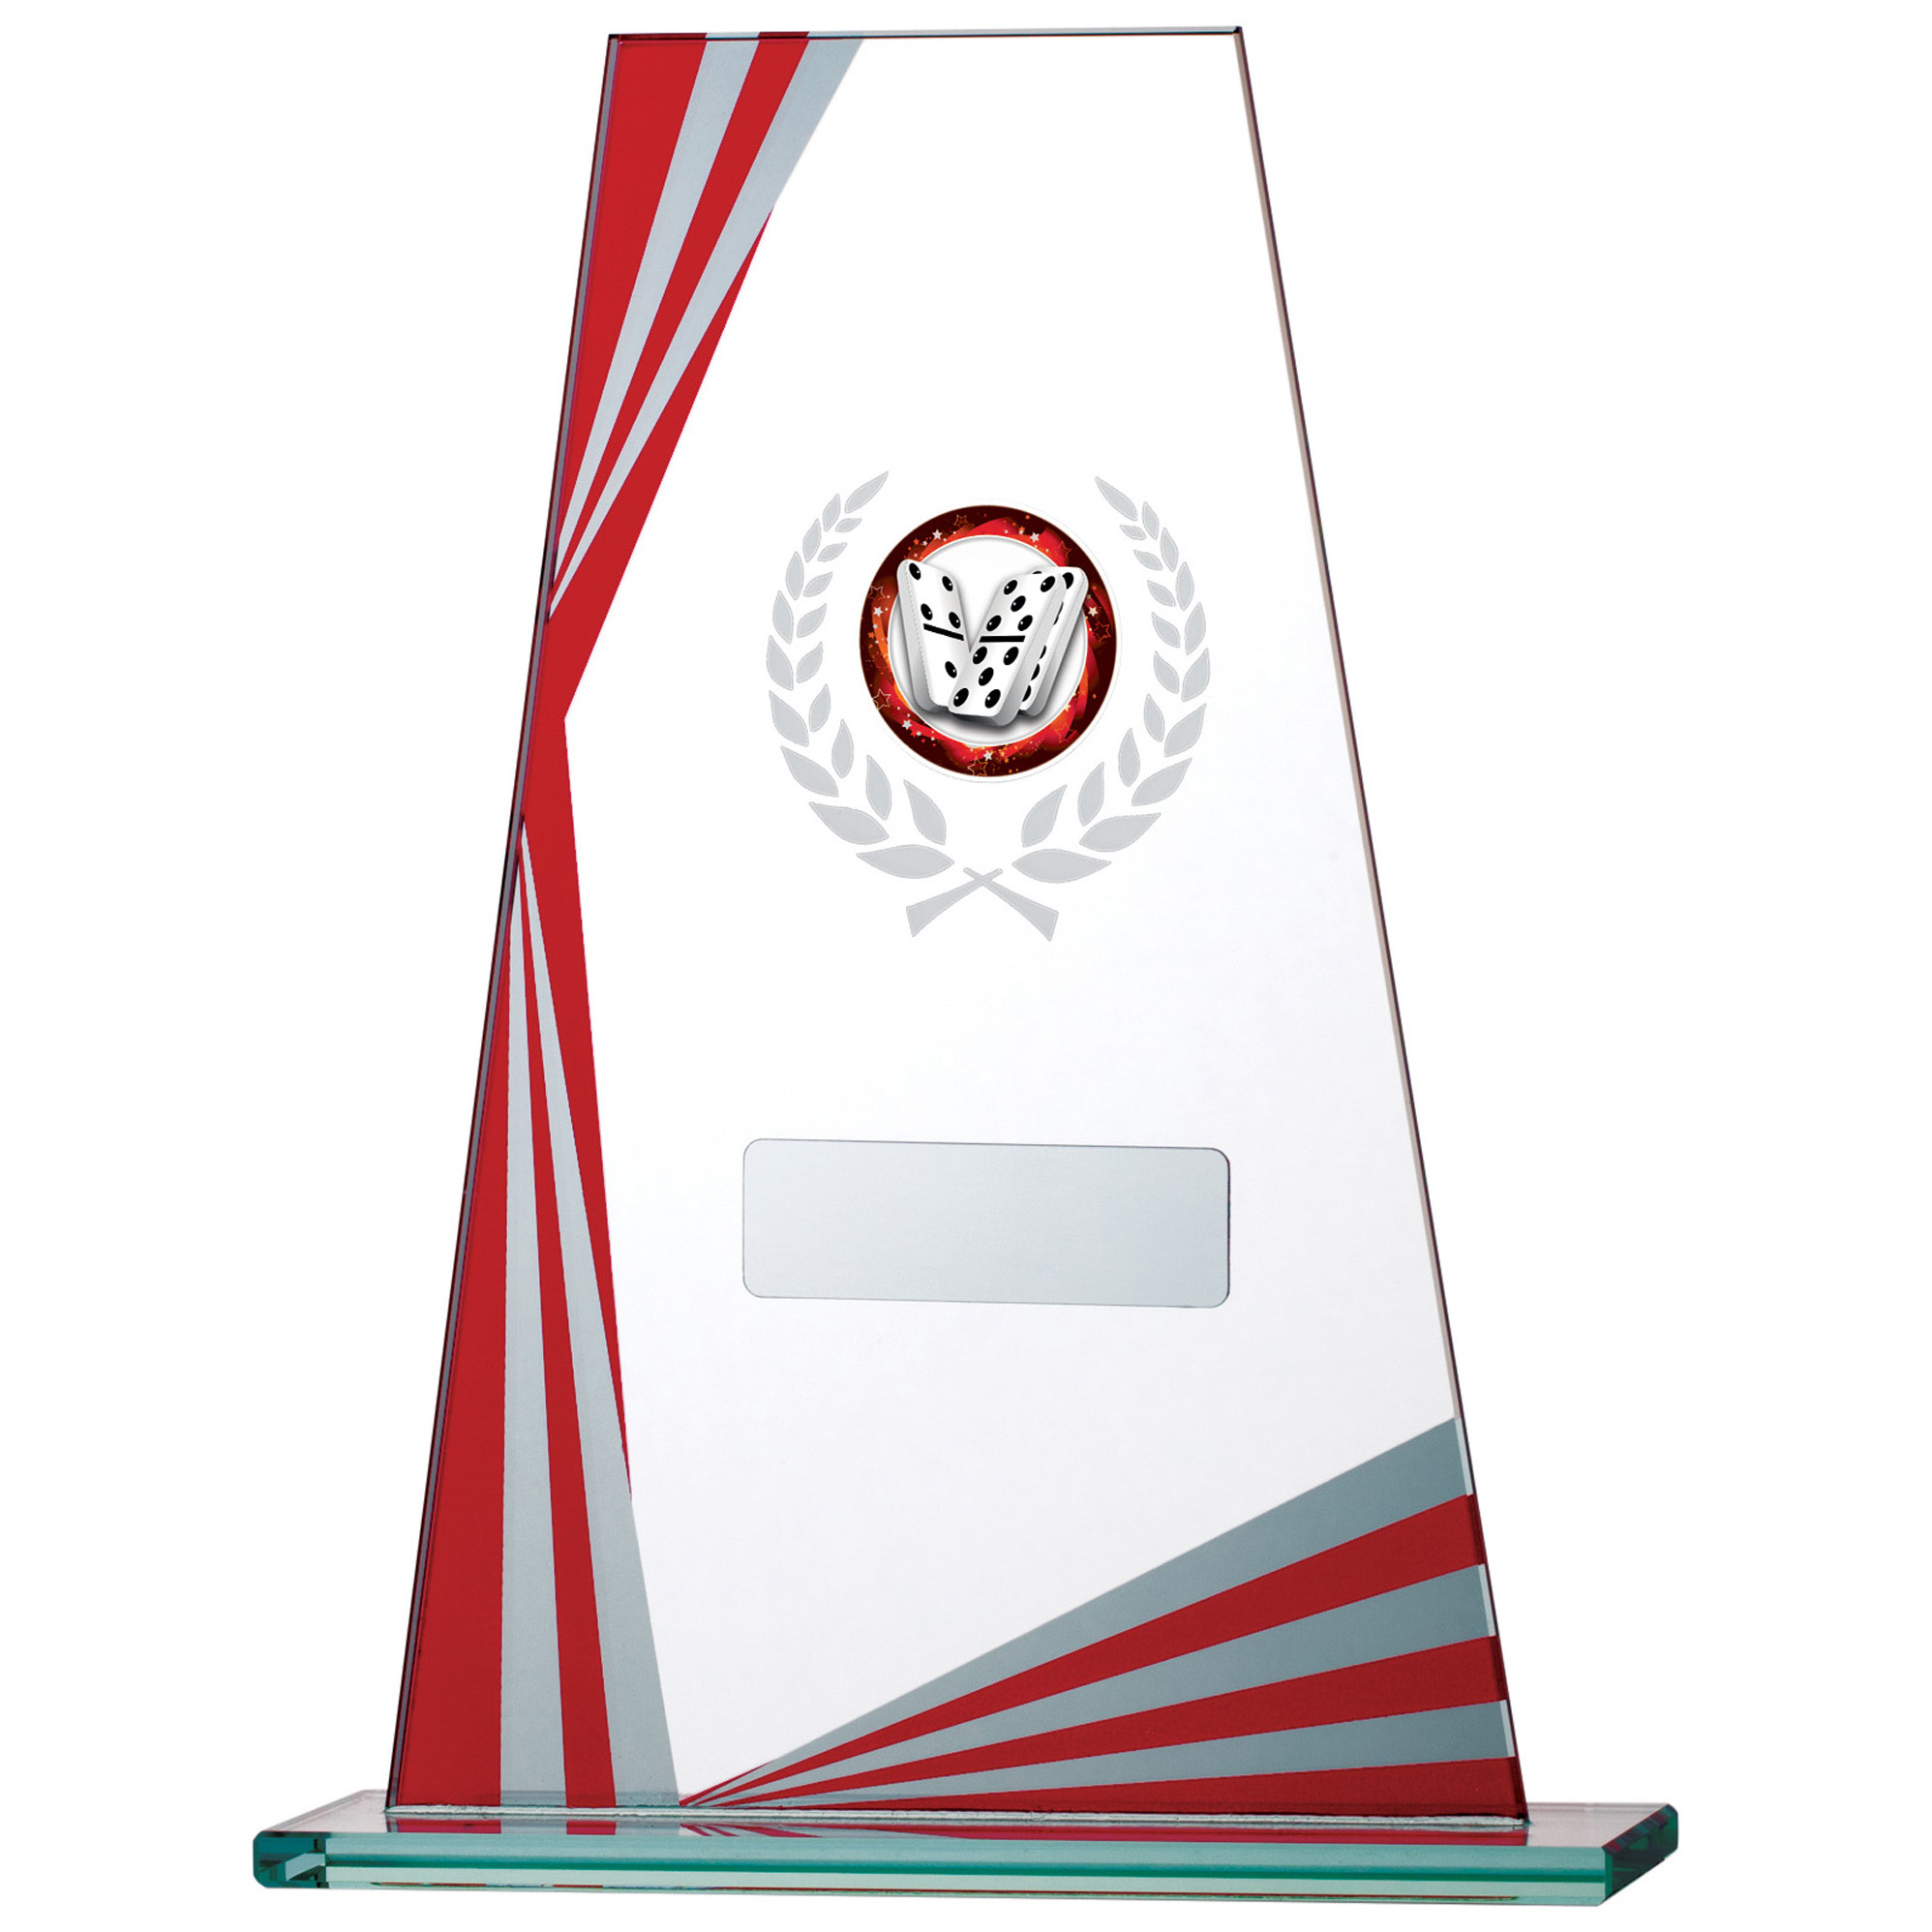 7.25'' RED CLEAR GLASS AWARD